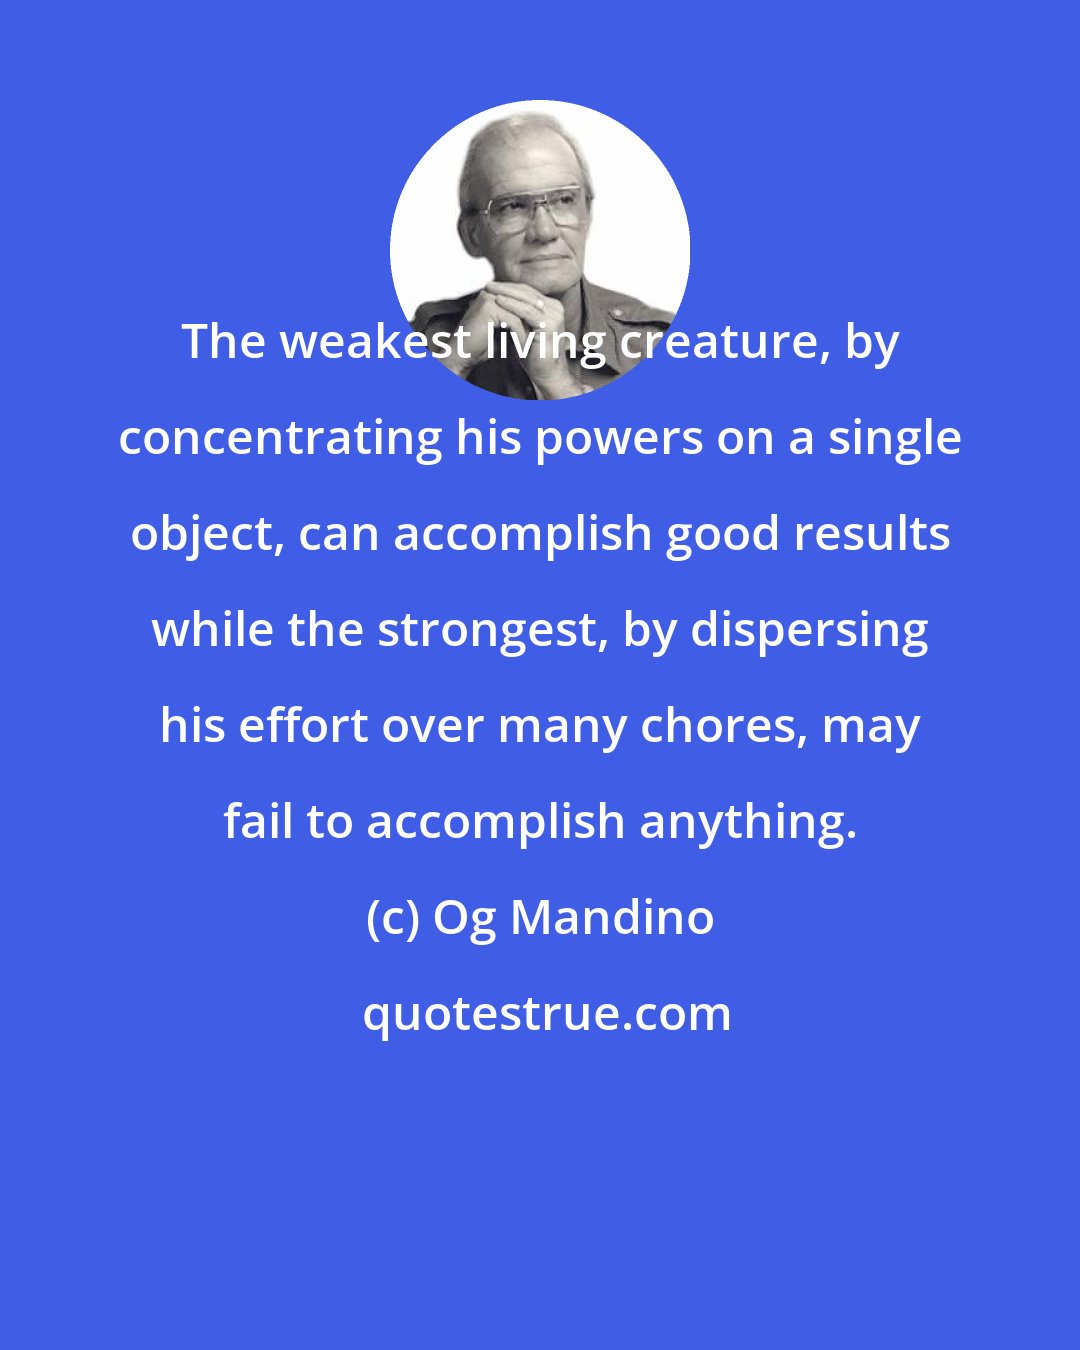 Og Mandino: The weakest living creature, by concentrating his powers on a single object, can accomplish good results while the strongest, by dispersing his effort over many chores, may fail to accomplish anything.